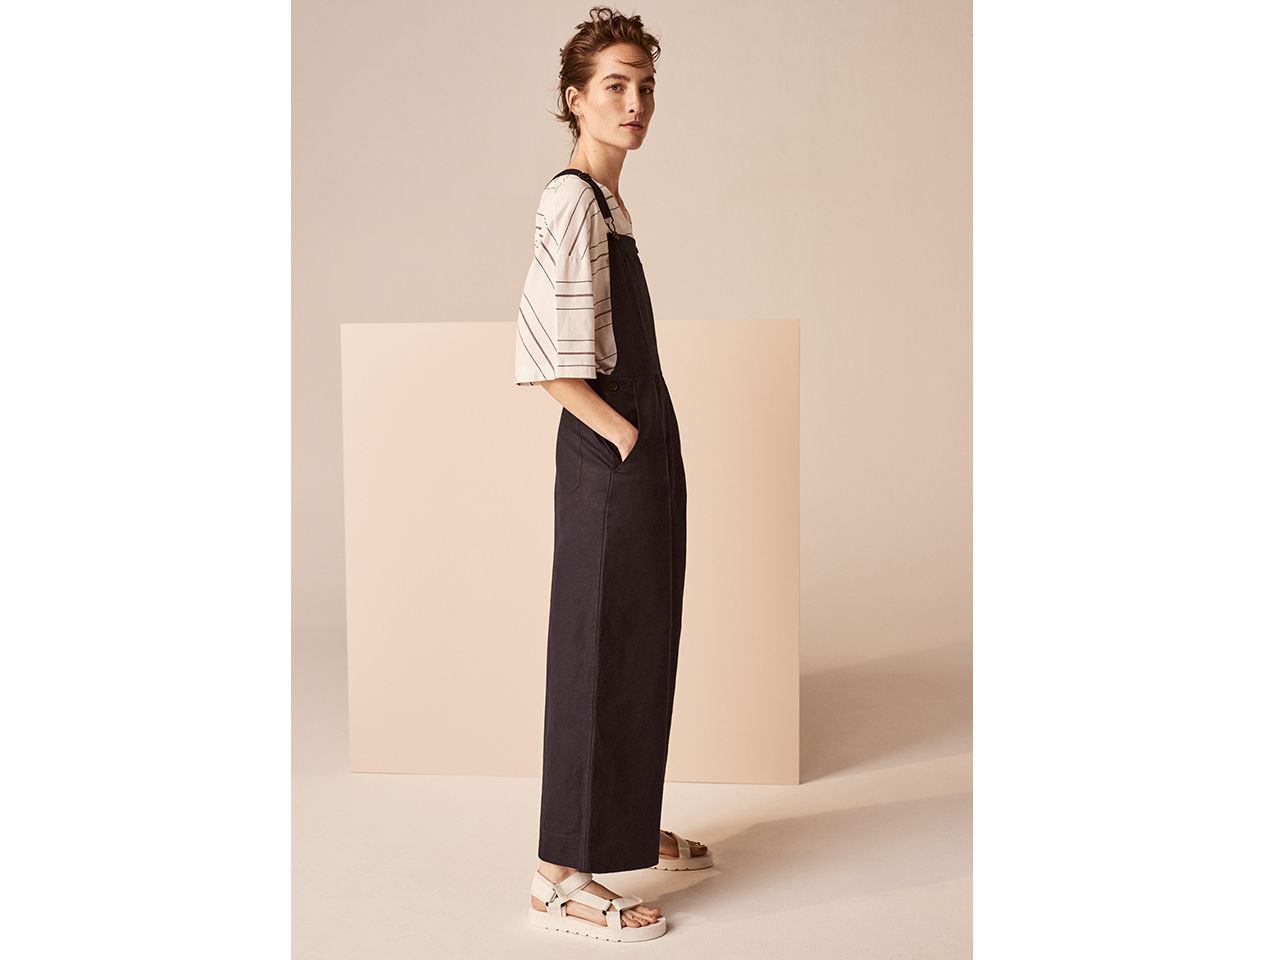 John Lewis Kin new collection with Rie Takeda